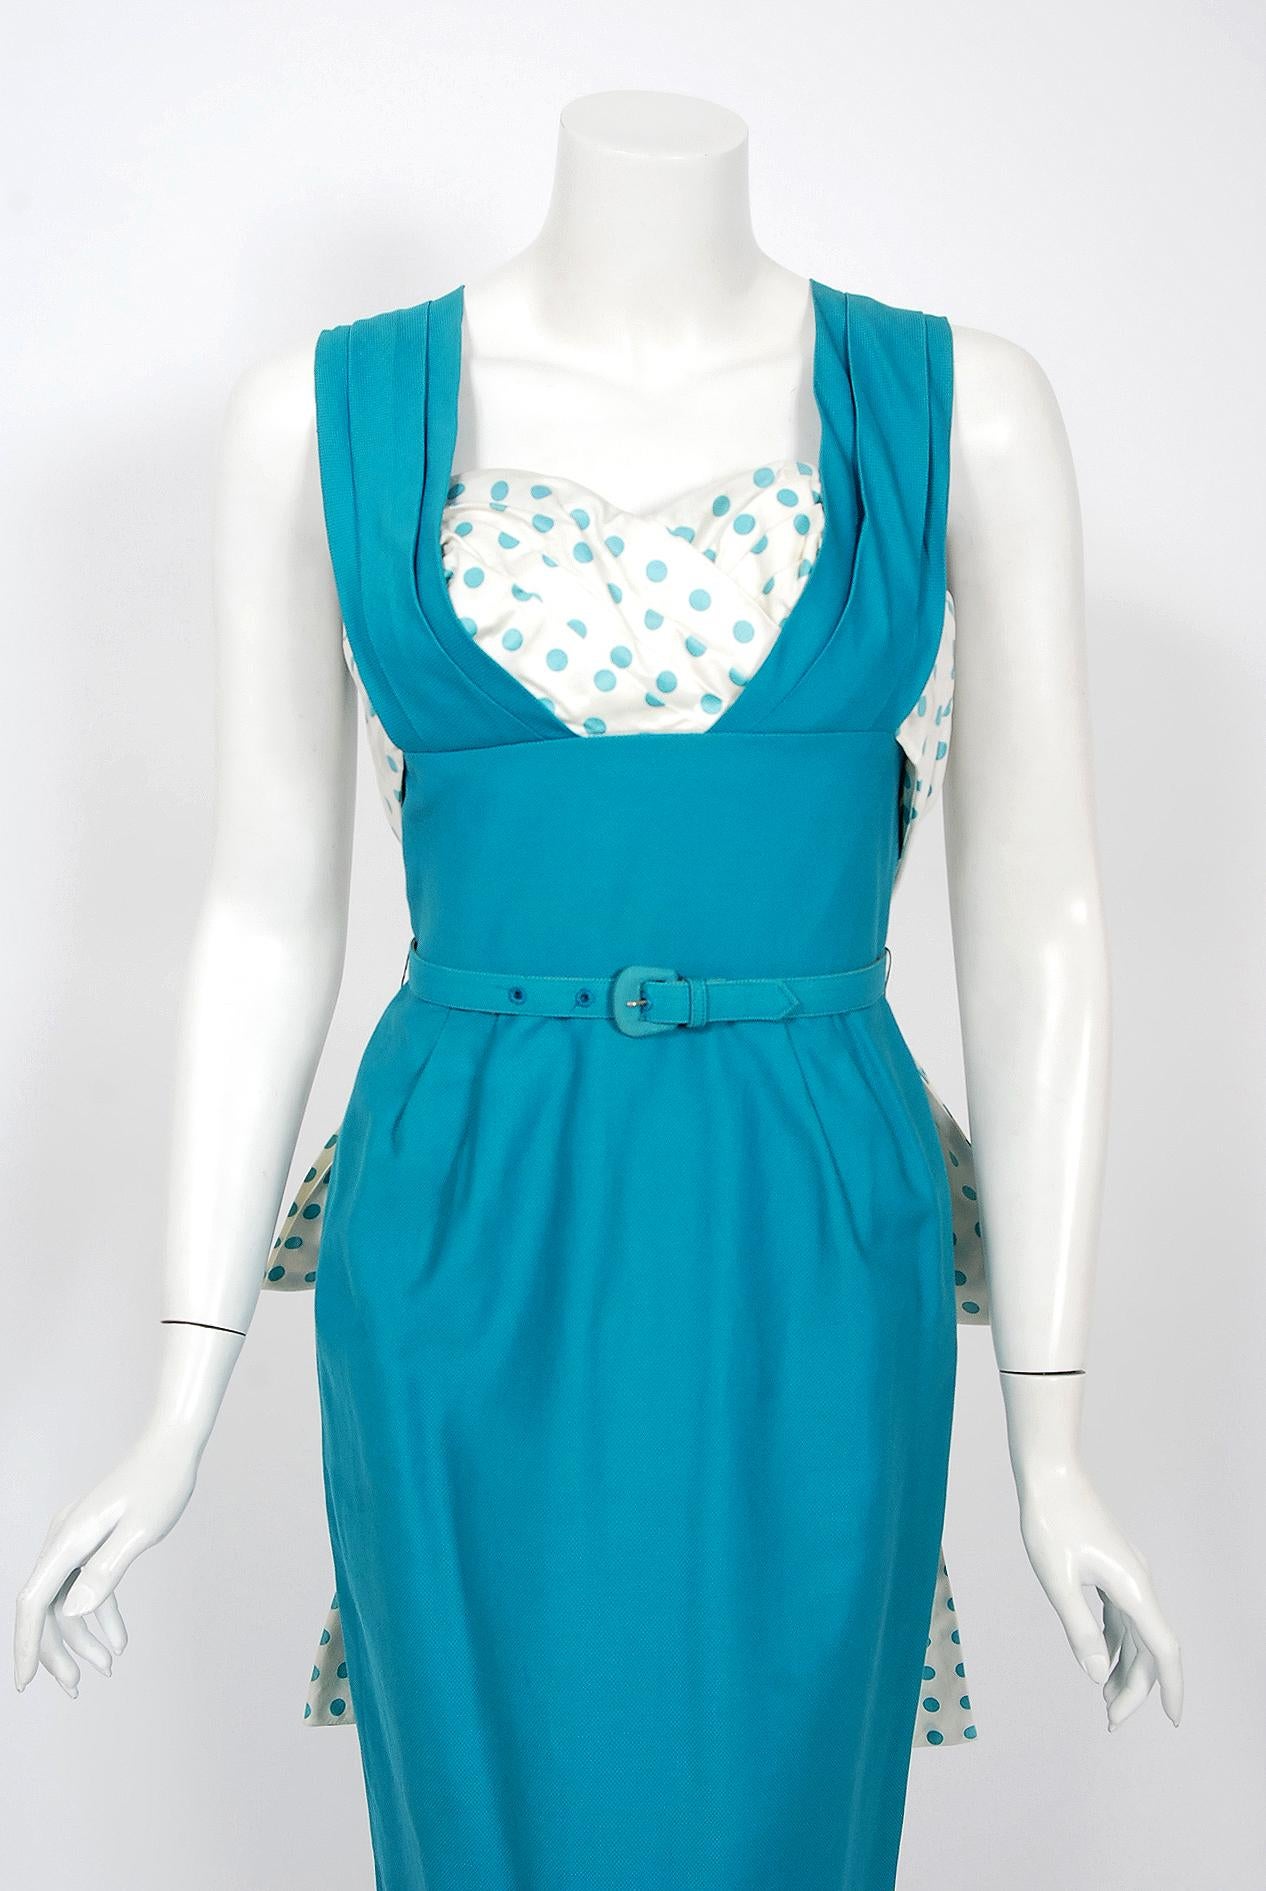 An amazing and highly stylized 1950's sundress by the Jay Original Miami designer label. This gorgeous garment is fashioned from a rich mid-weight blue cotton-pique with blue polka-dot print detail. The silhouette is classic pin-up femme fatale; the